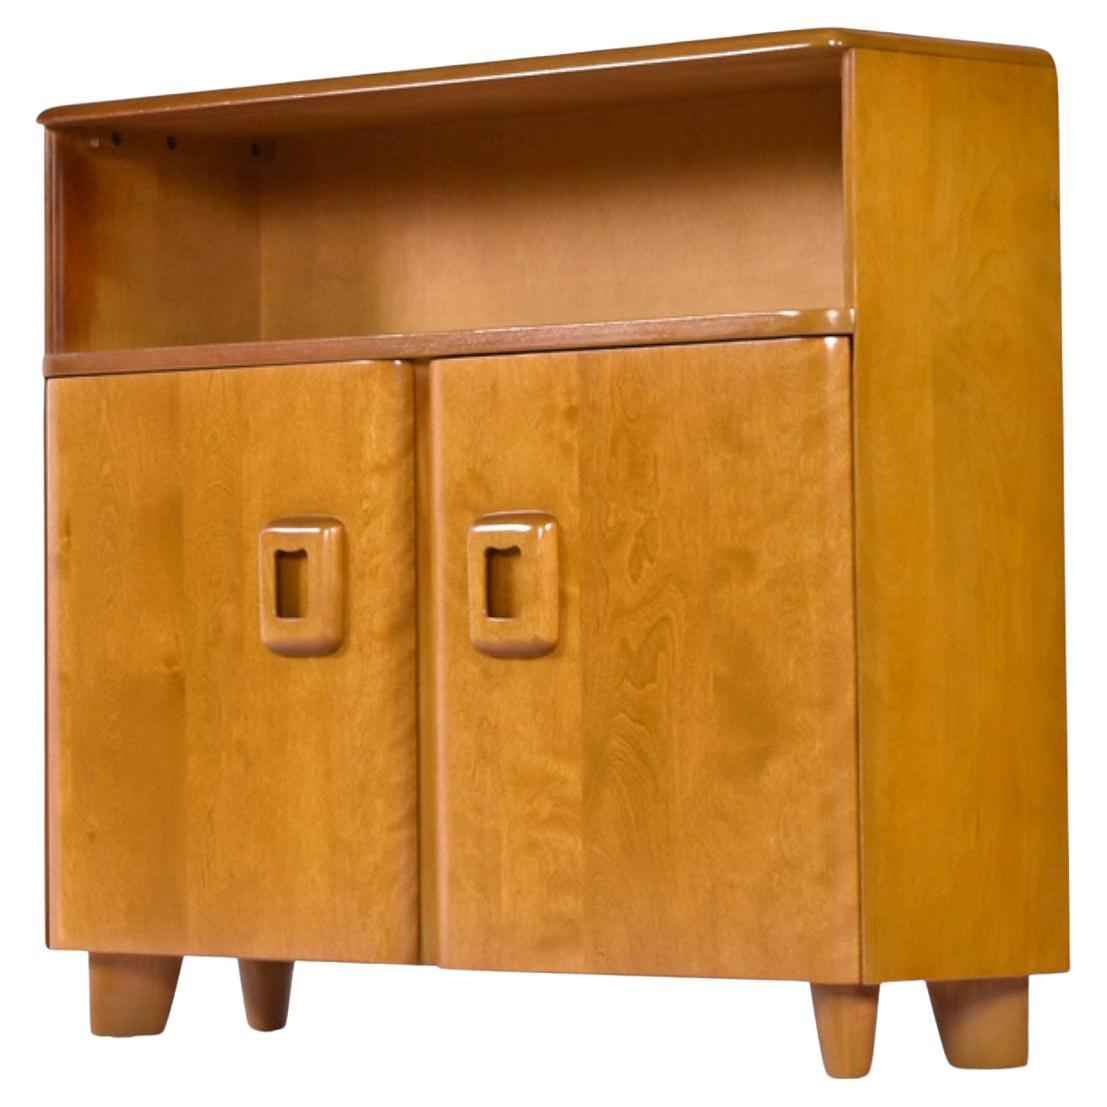 Restored Heywood Wakefield Wheat Finish M326 Cabinet Bookcase For Sale